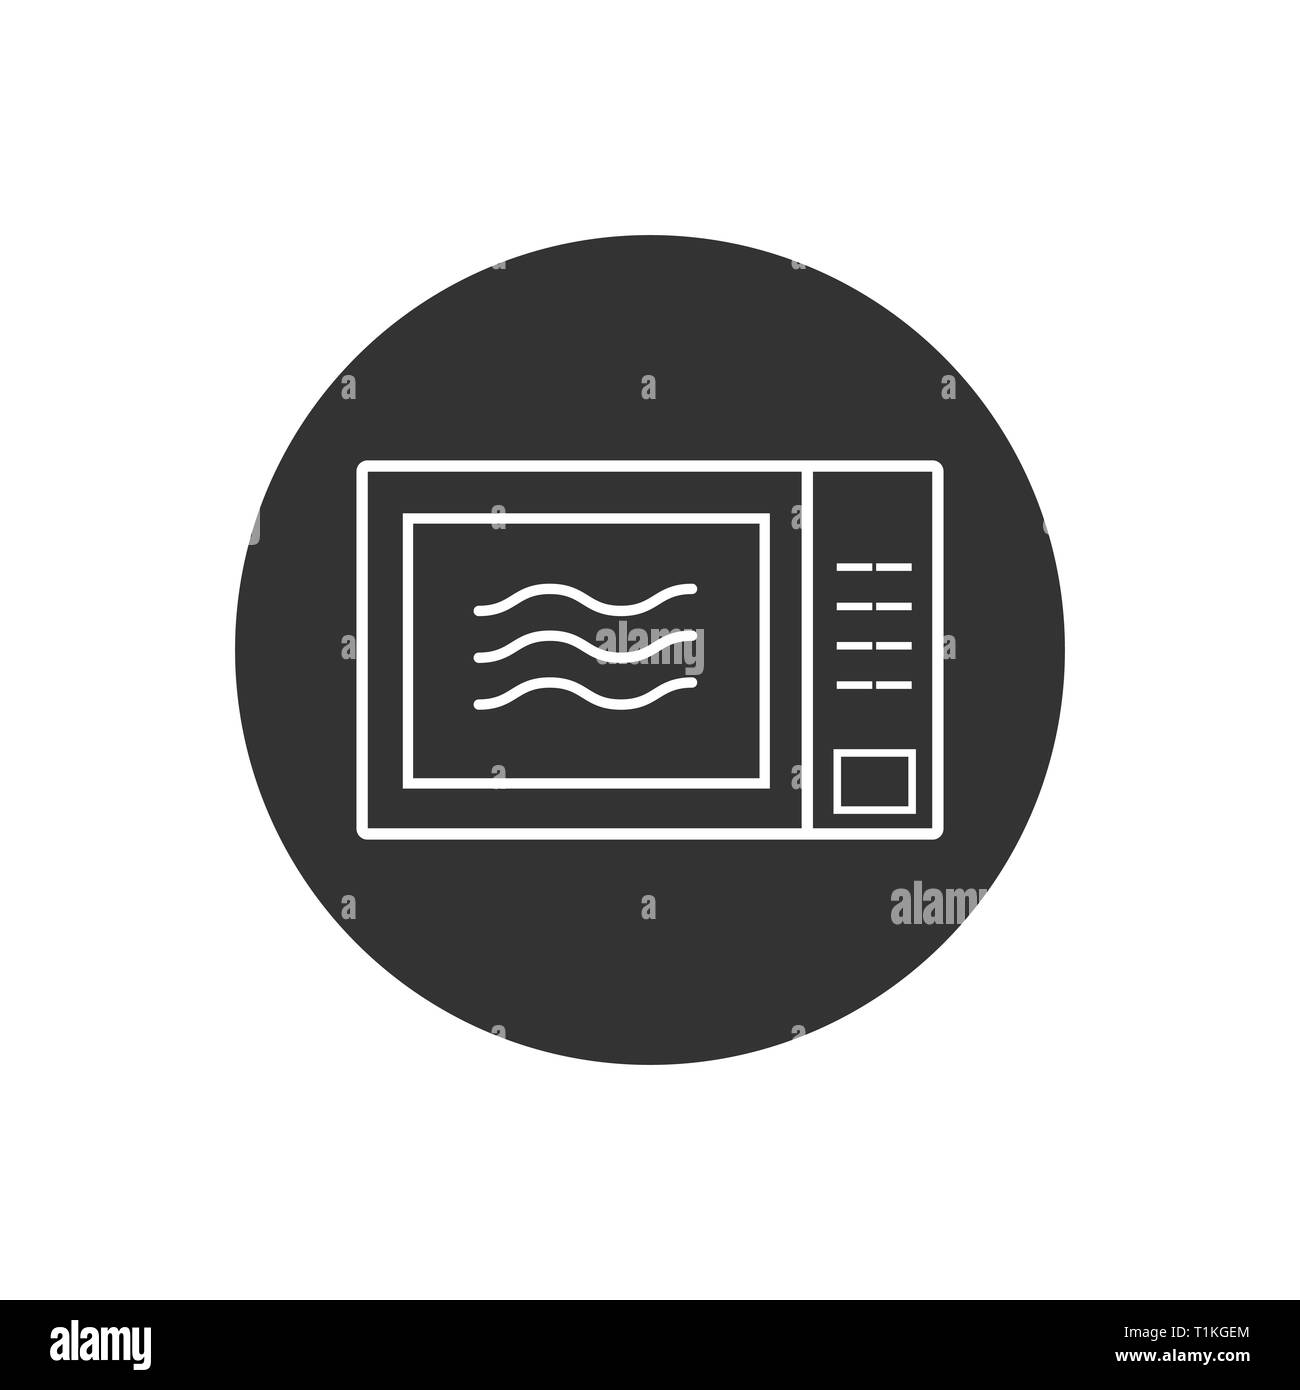 Vector illustration, flat design. Home appliance, kitchen microwave icon Stock Vector